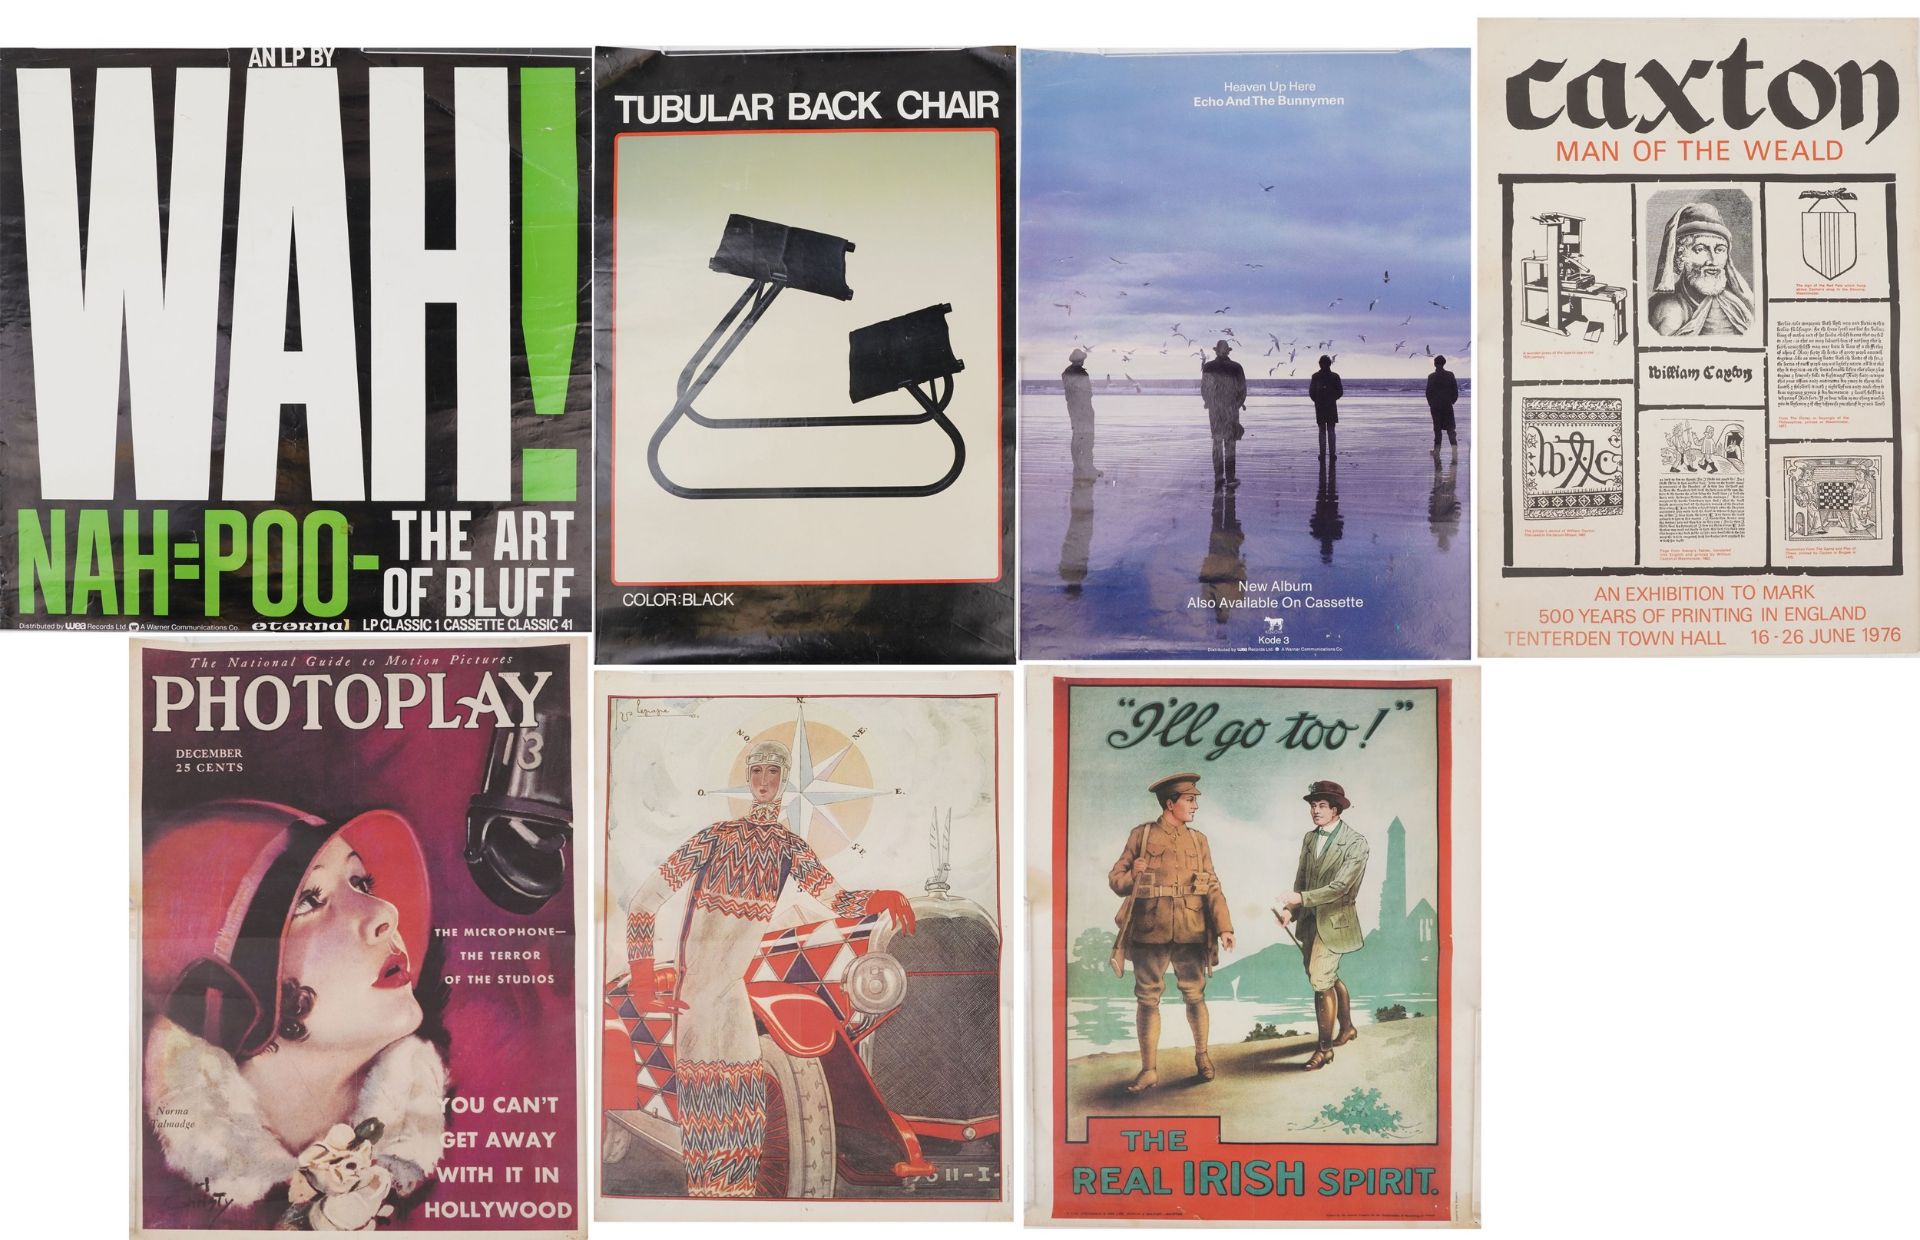 Seven vintage and later posters including Vogue, Caxton Man of the Weald Exhibition June 1976 and